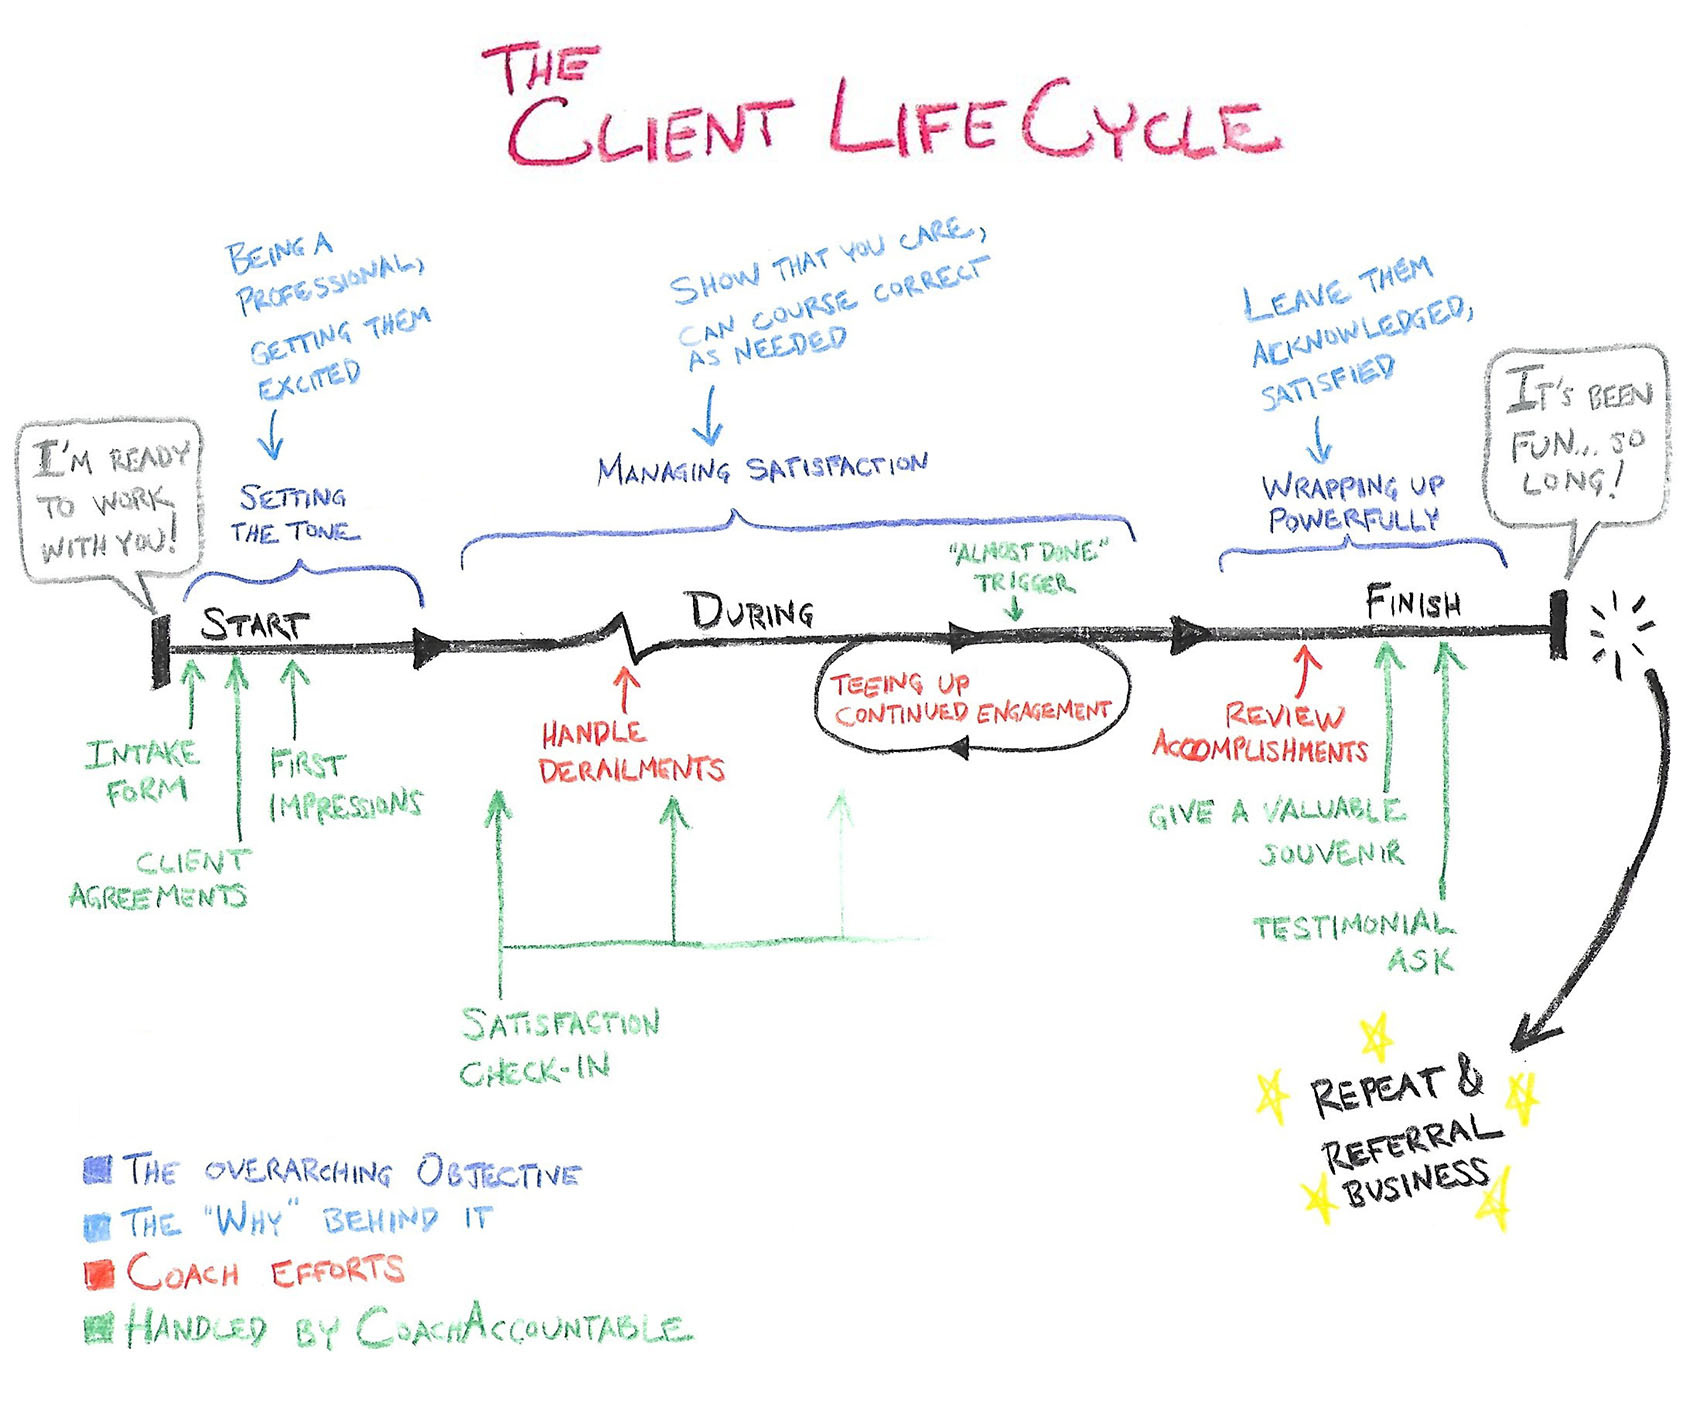 Hand-drawn diagram of The Client Life Cycle